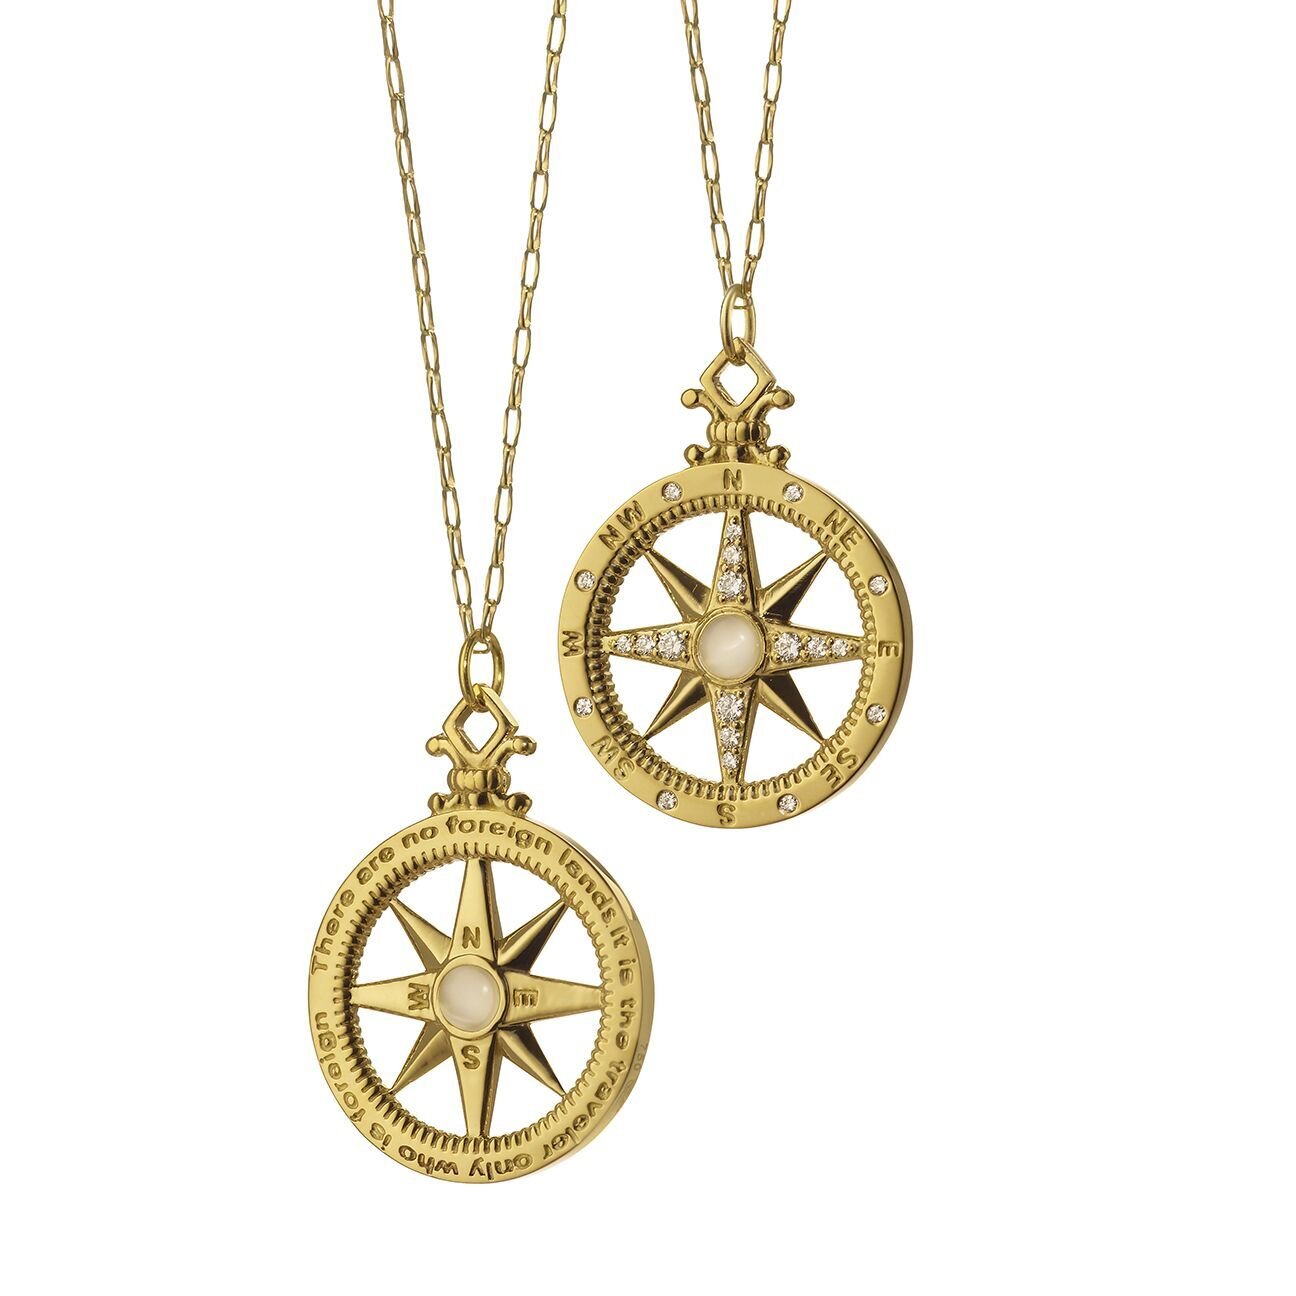 Global Compass Charm (Yellow Gold)